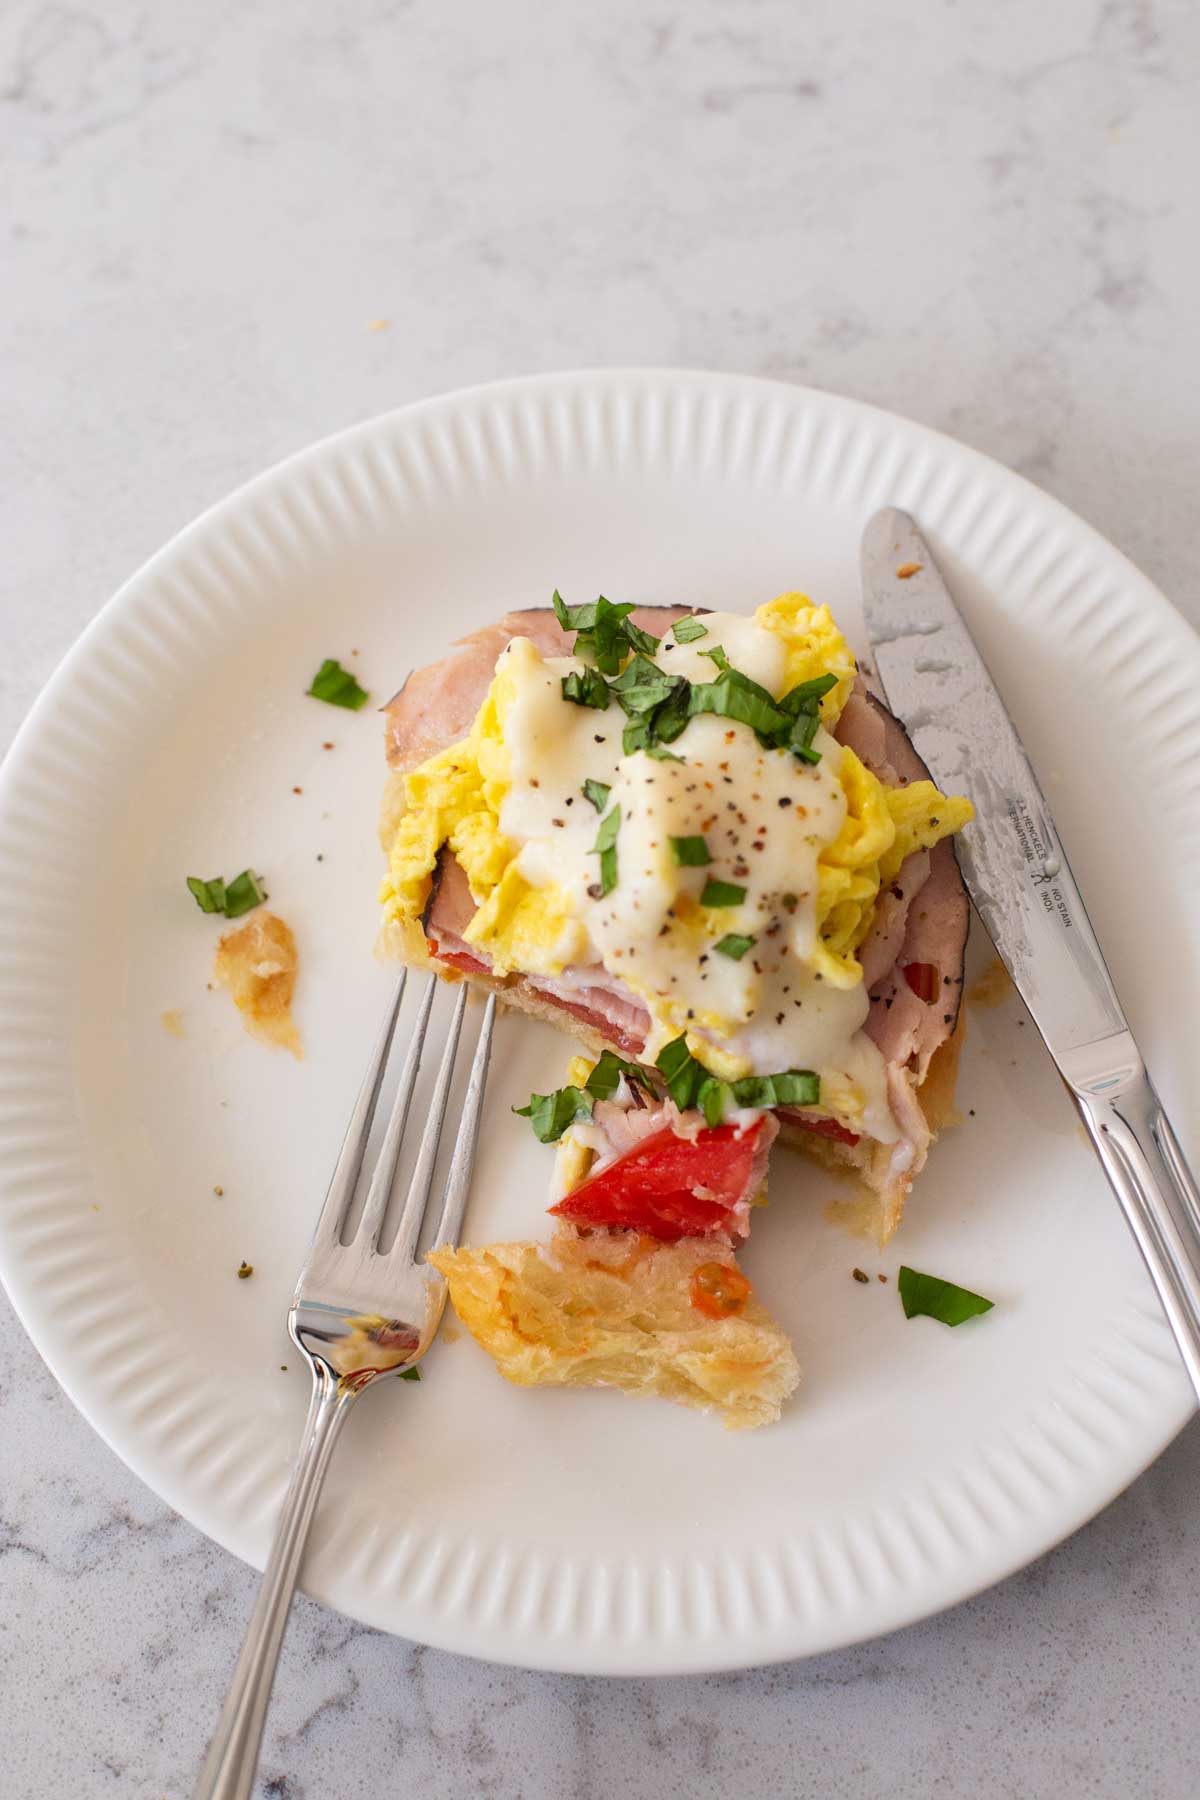 The easy eggs benedict variation has been cut with a fork and knife.